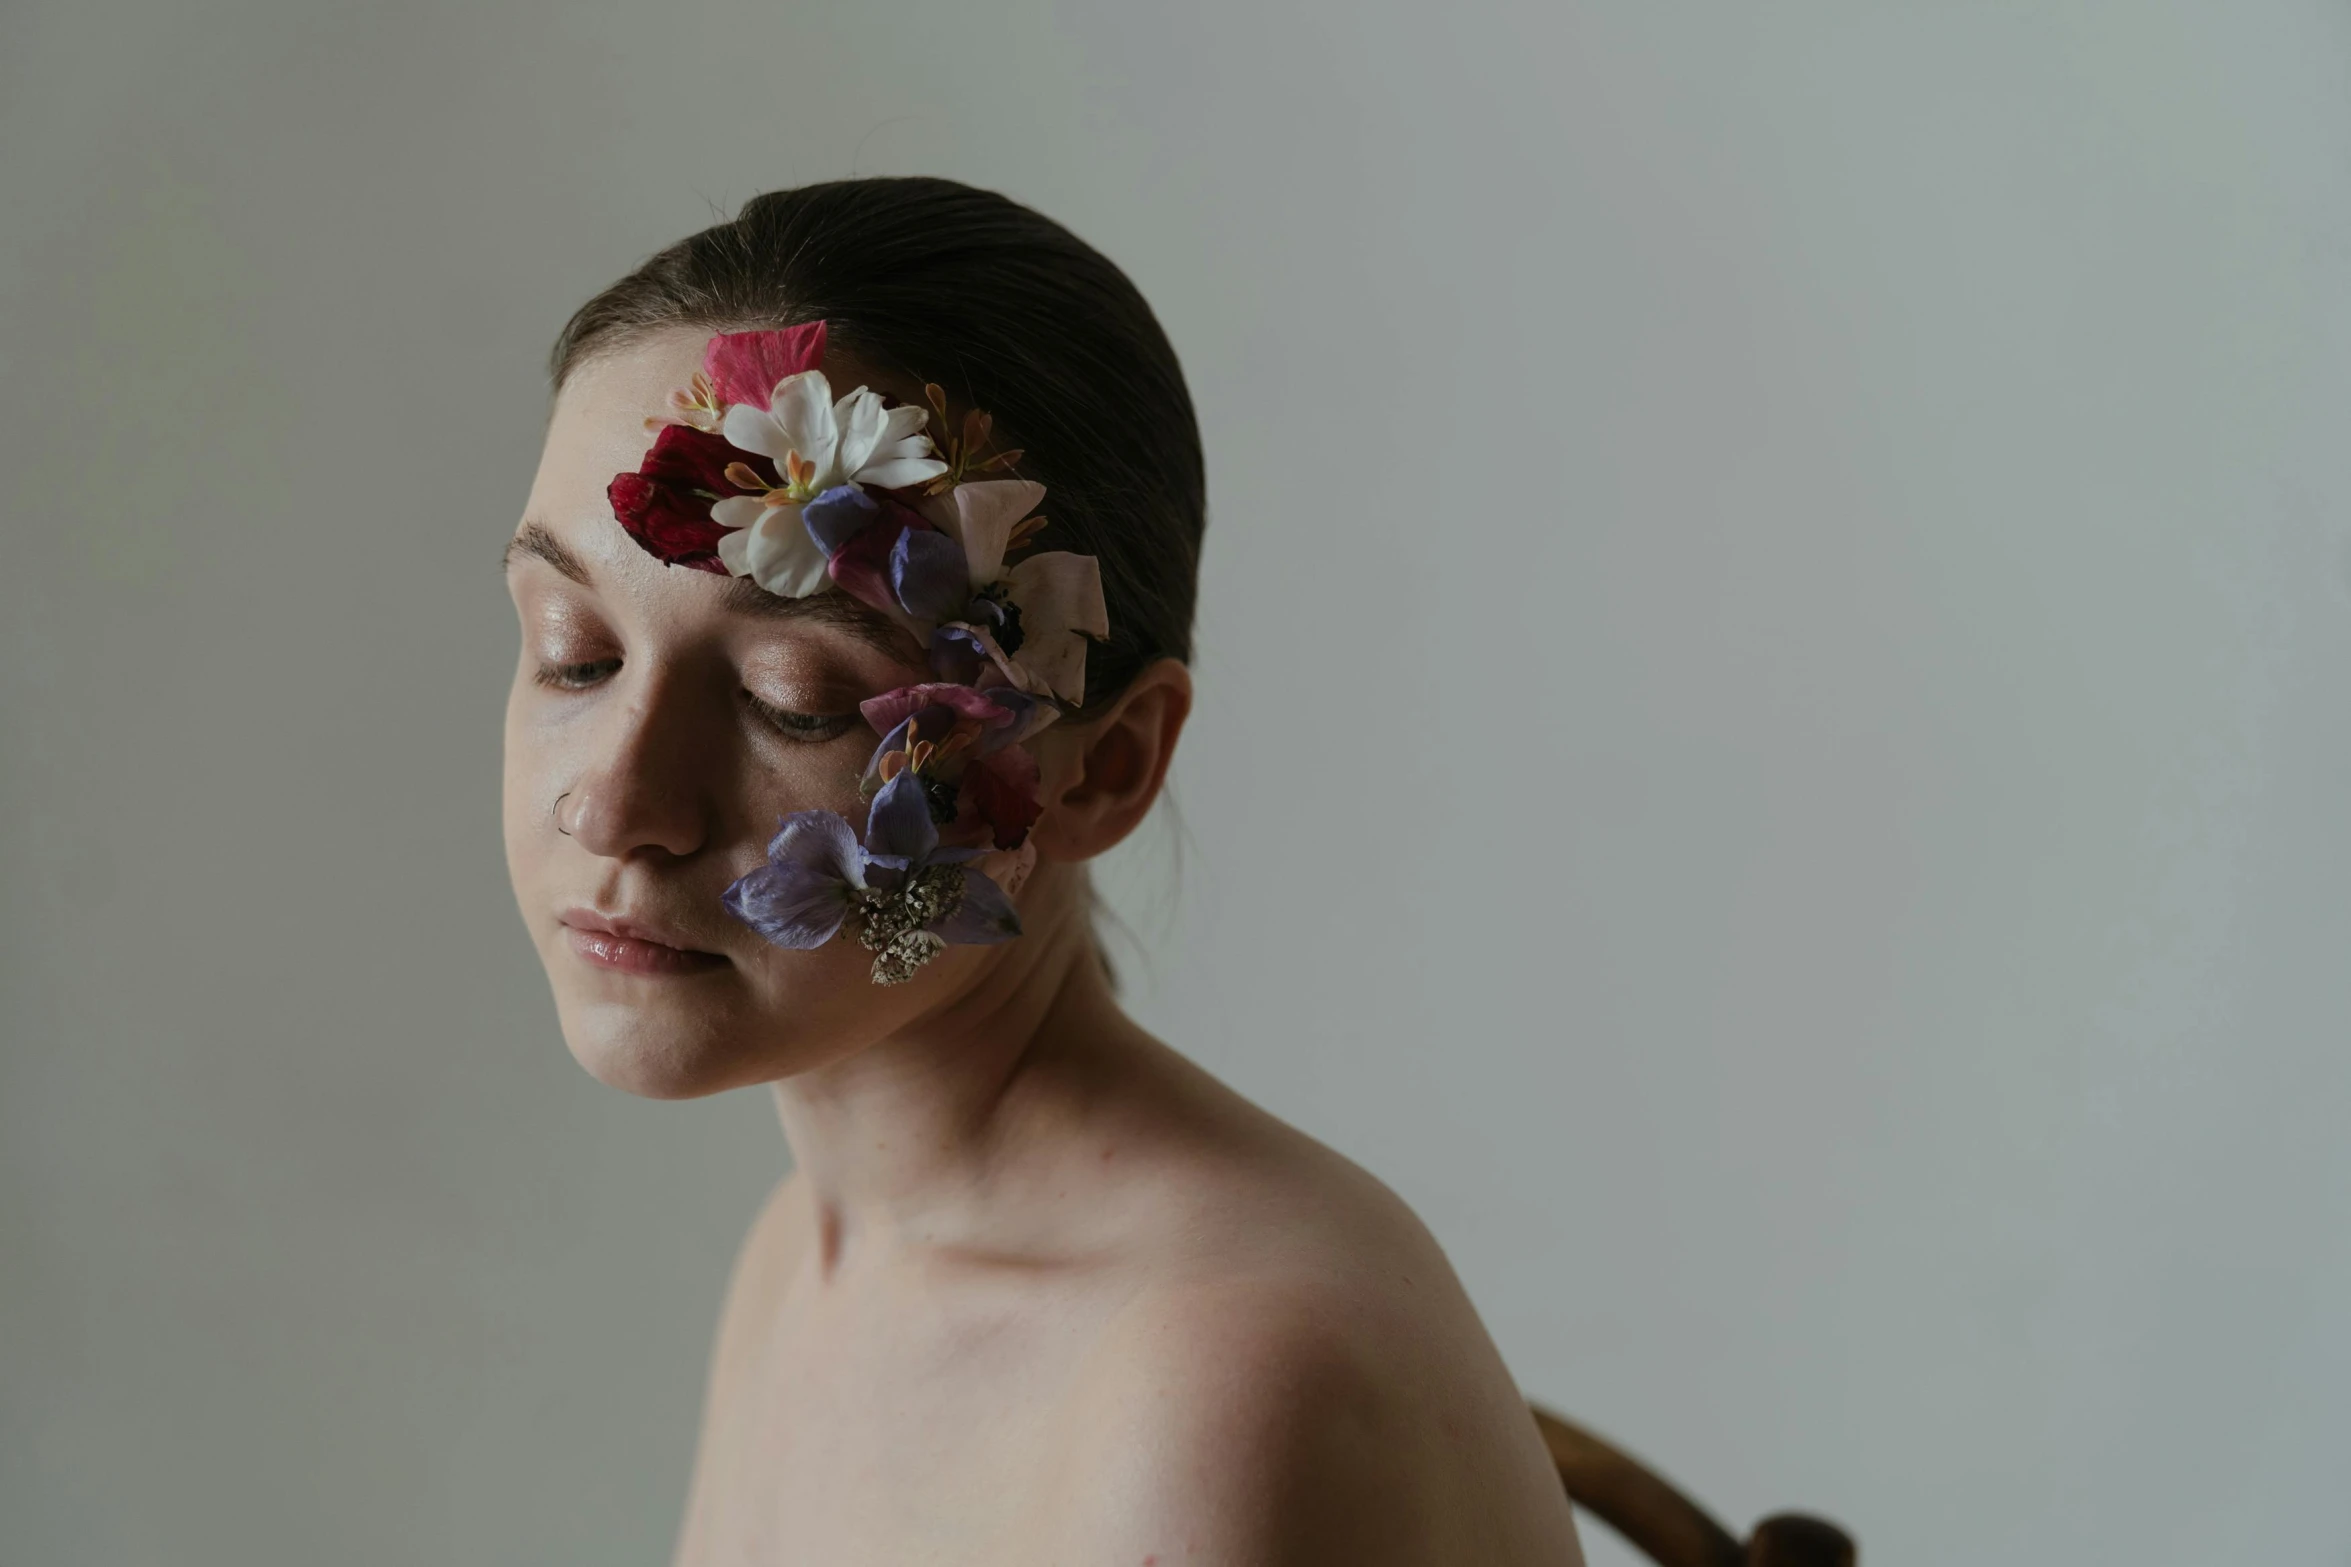 a woman with flowers painted on her face, an album cover, by Fiona Rae, unsplash, hyperrealism, portrait of a ballerina, soft light from the side, organic headpiece, photograph taken in 2 0 2 0